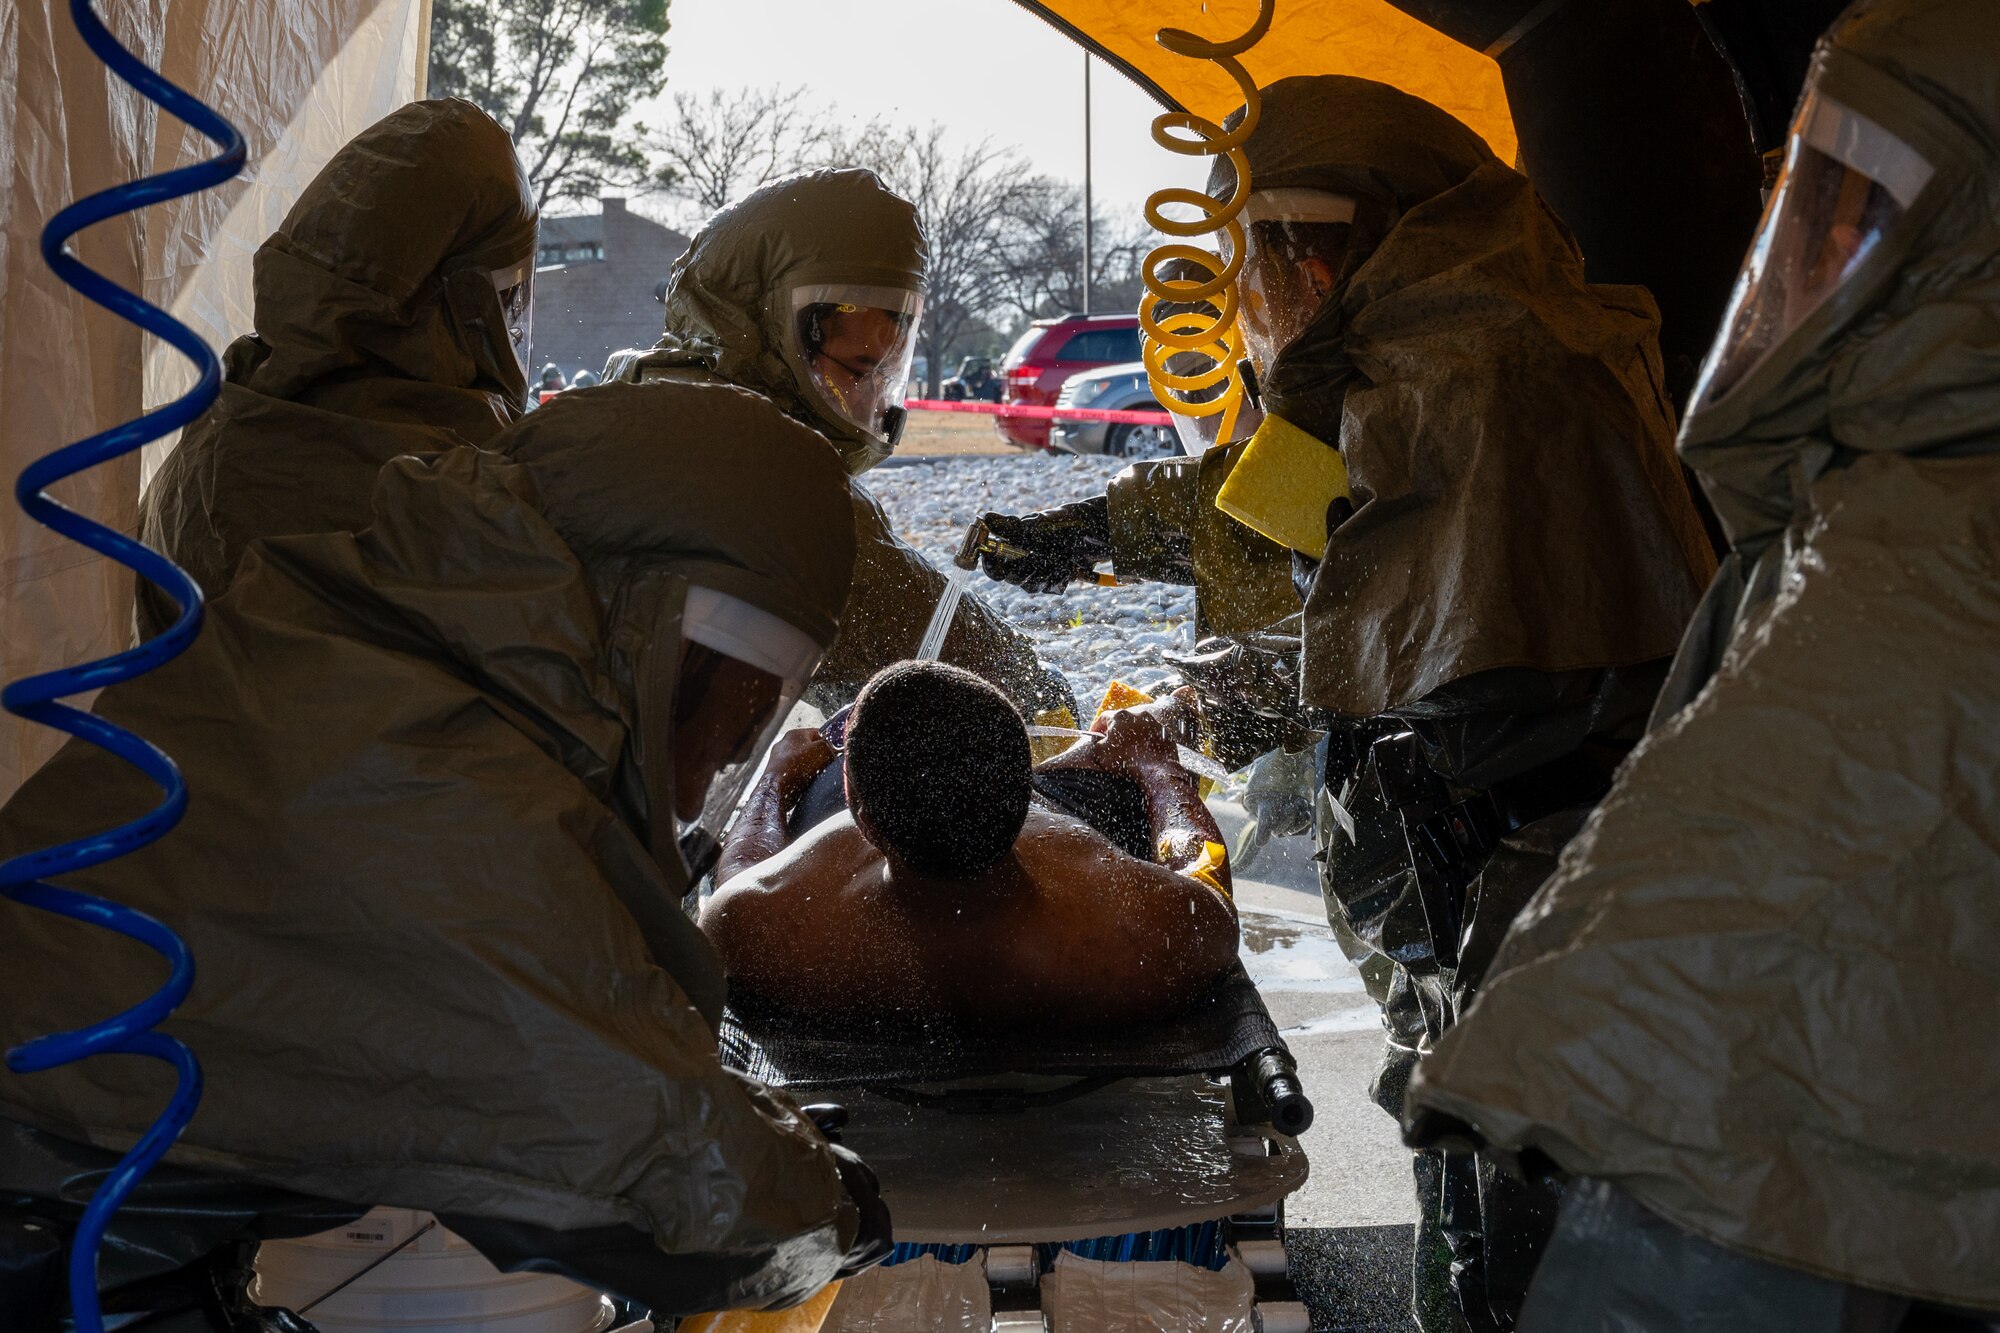 U.S. Air Force Airmen from the 47th Medical Group (MDG) decontaminate a patient during exercise Ready Eagle II at Laughlin Air Force Base, Texas, Jan. 31, 2024.  Exercise Ready Eagle II allowed Airmen to sharpen their response procedures, patient care skills, and increase service member survivability. Decontamination allows Airmen to clean off chemicals before moving them into the 47th MDG building for further treatment. (U.S. Air Force photo by Staff Sgt. Nicholas Larsen)